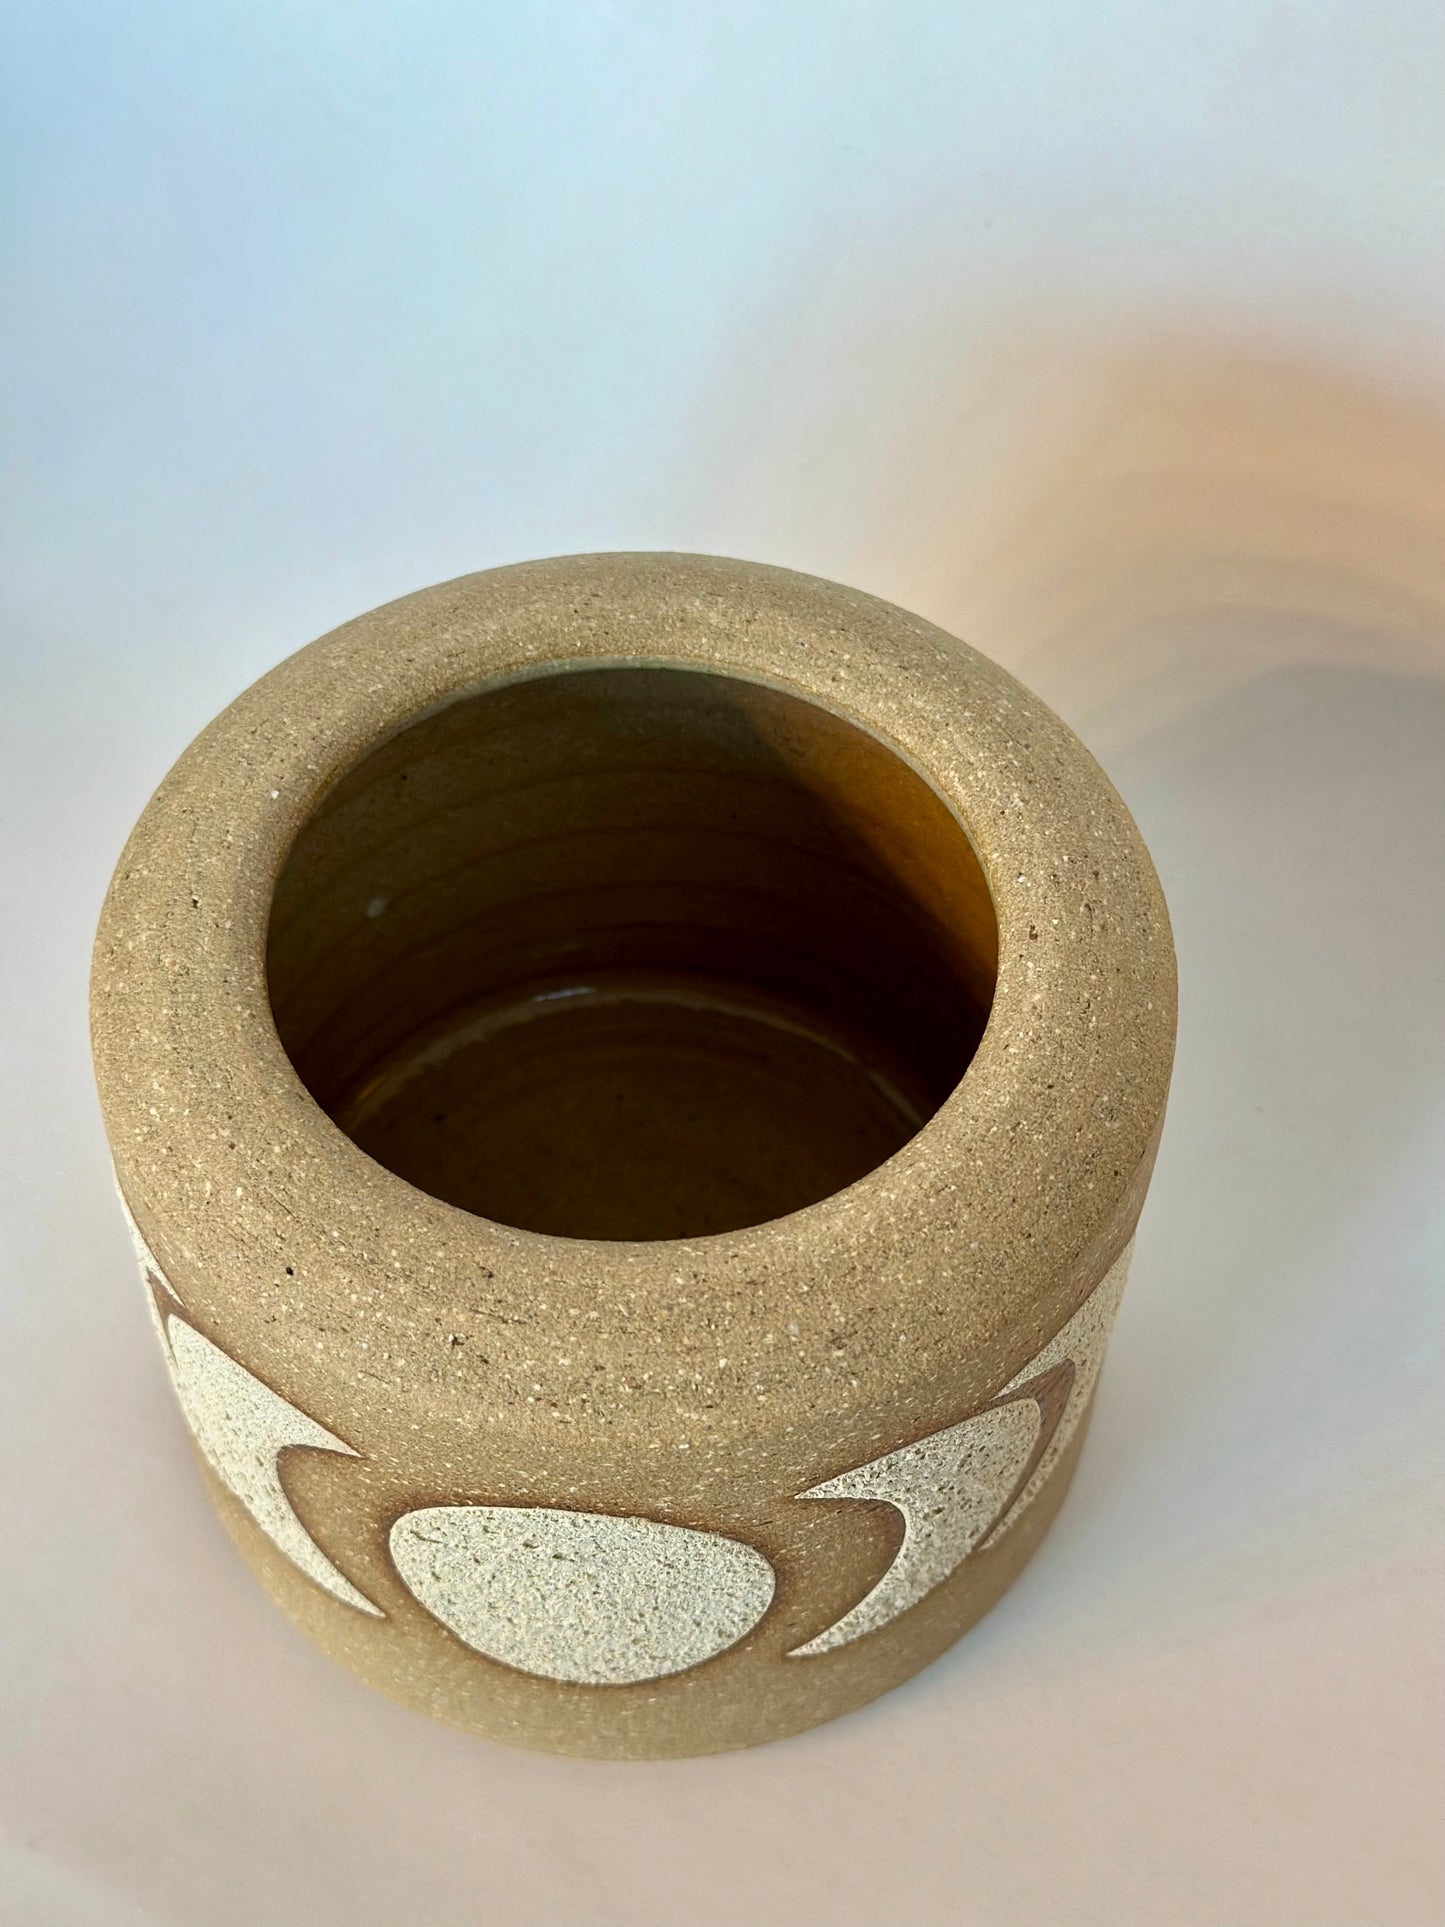 Moon Phase Pots | Danny Aguirre